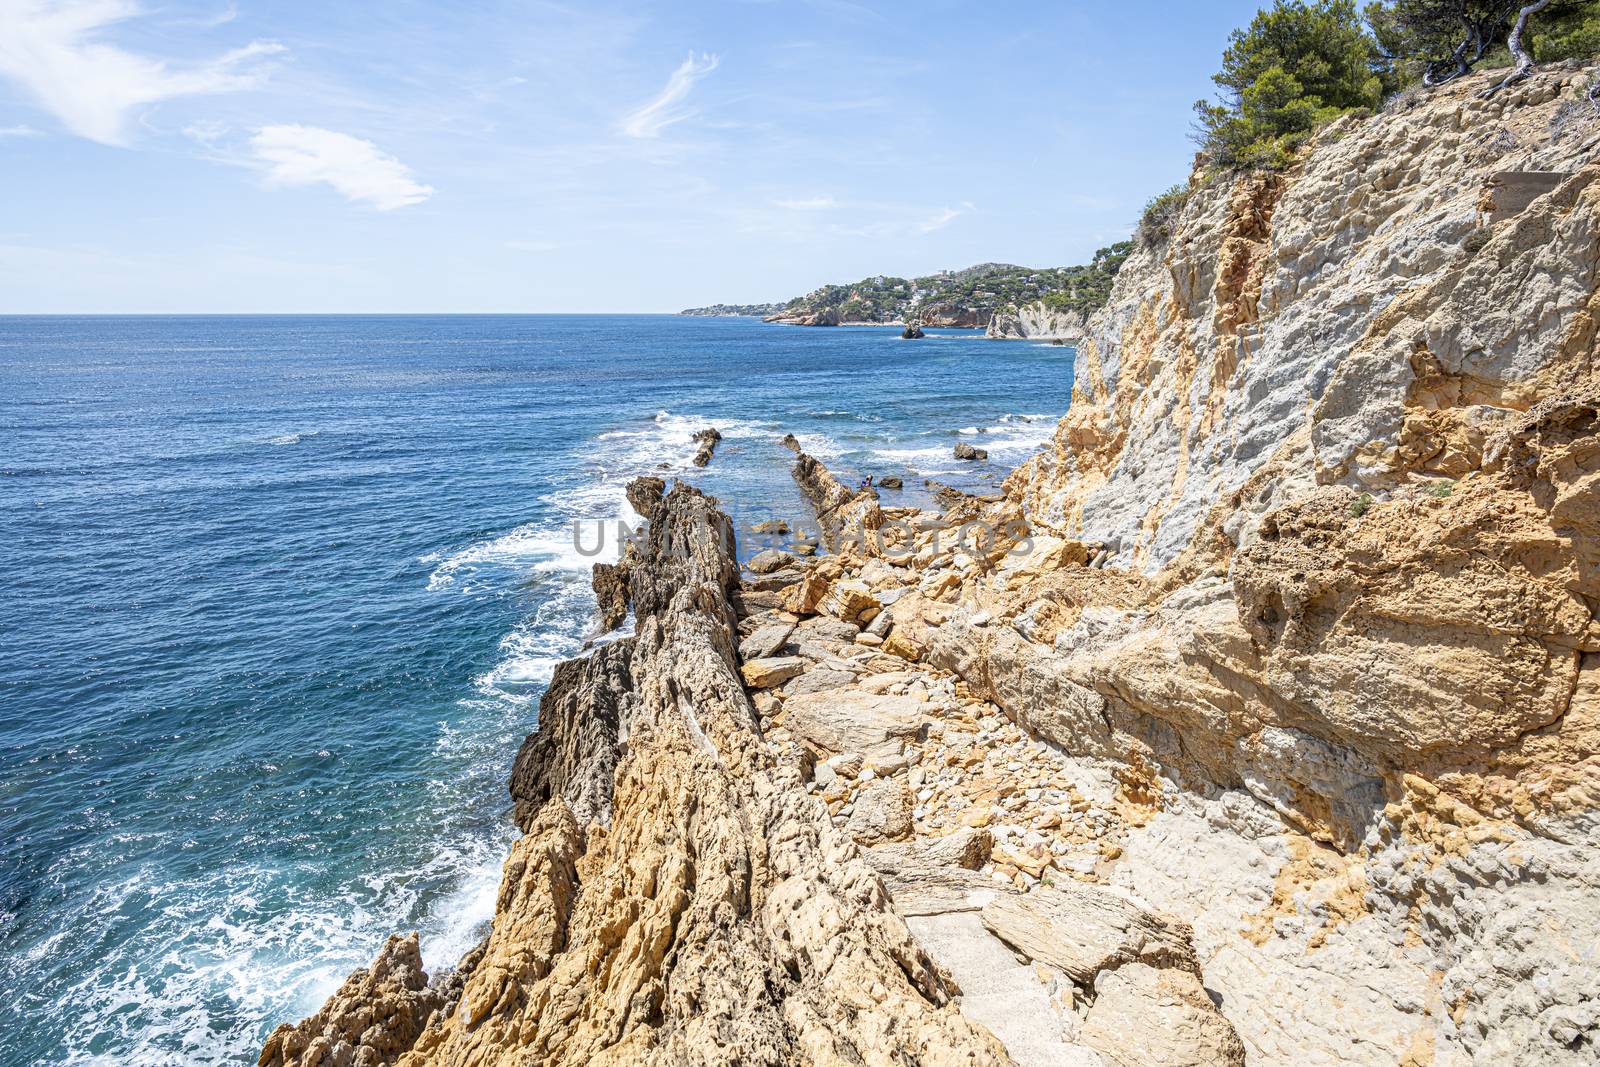 Landscape of Rocky area near the Mediterranean sea at the Calanque of Figuieres, creek of Figuieres, South of France, Europe